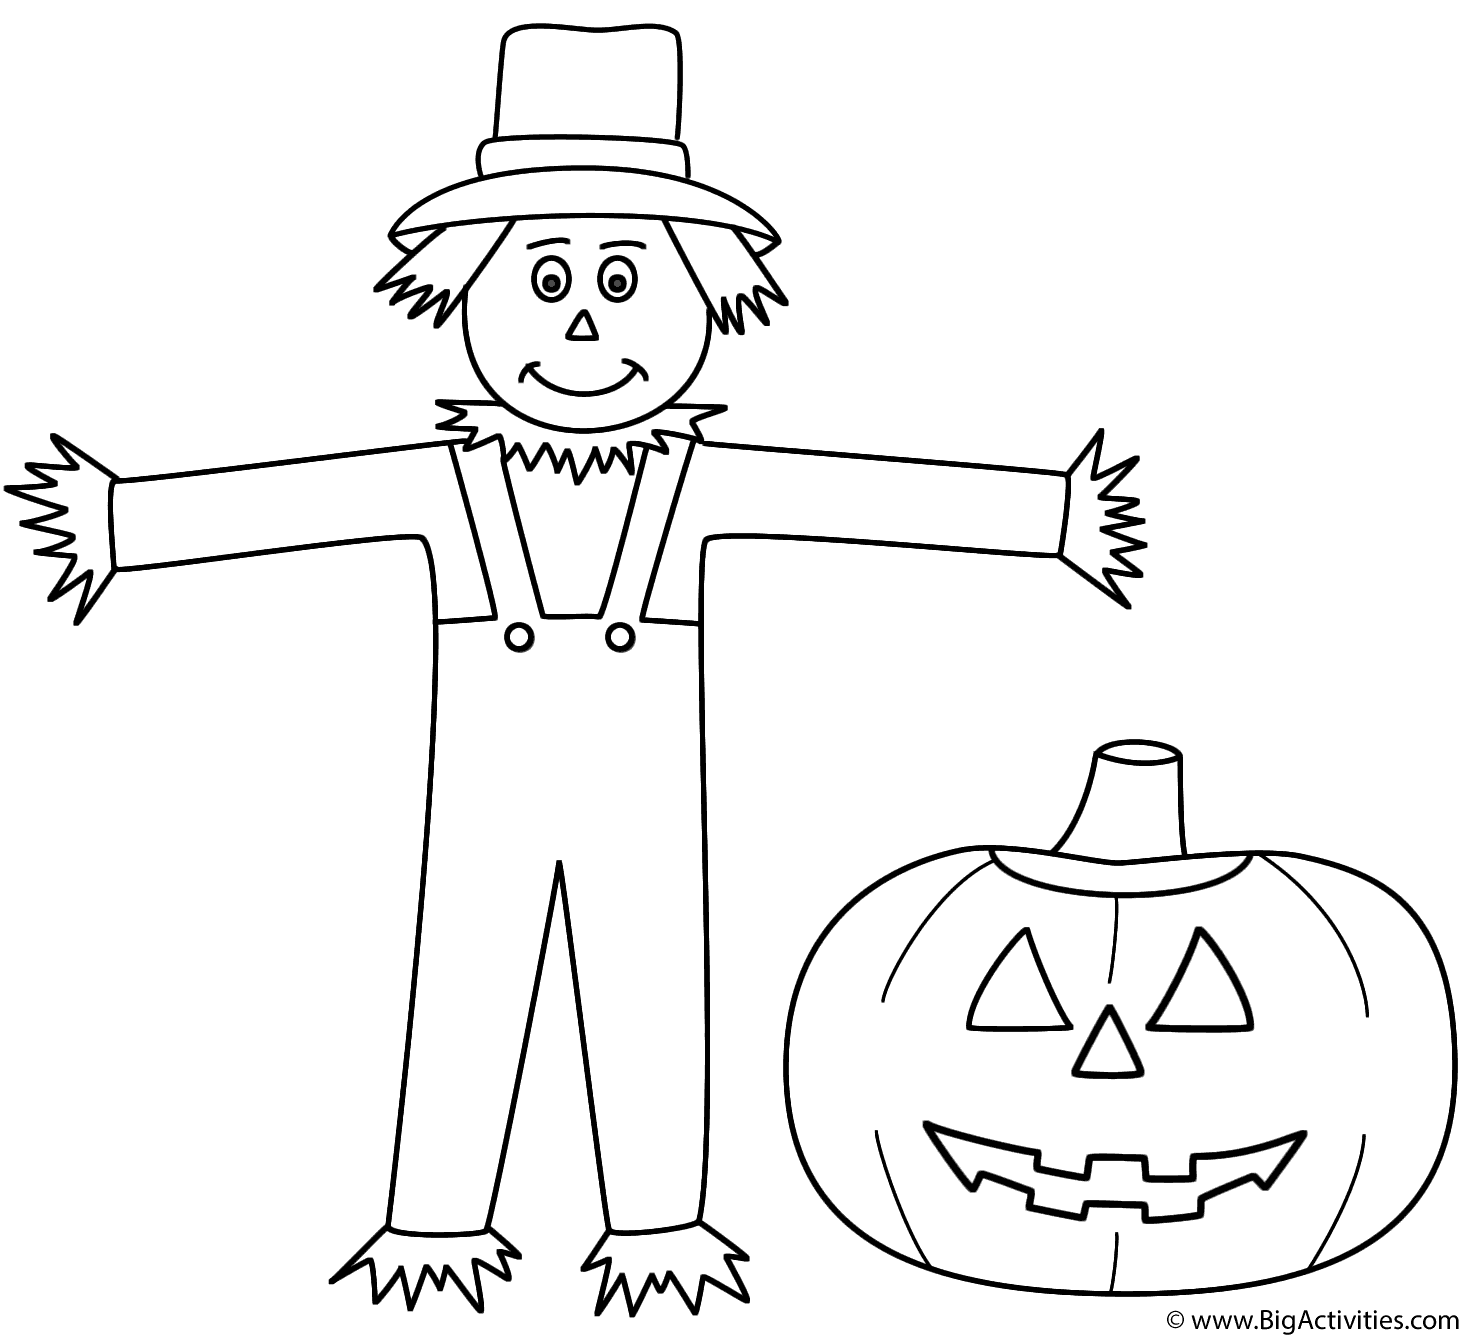 Download Scarecrow with pumpkin/jack-o-lantern - Coloring Page ...